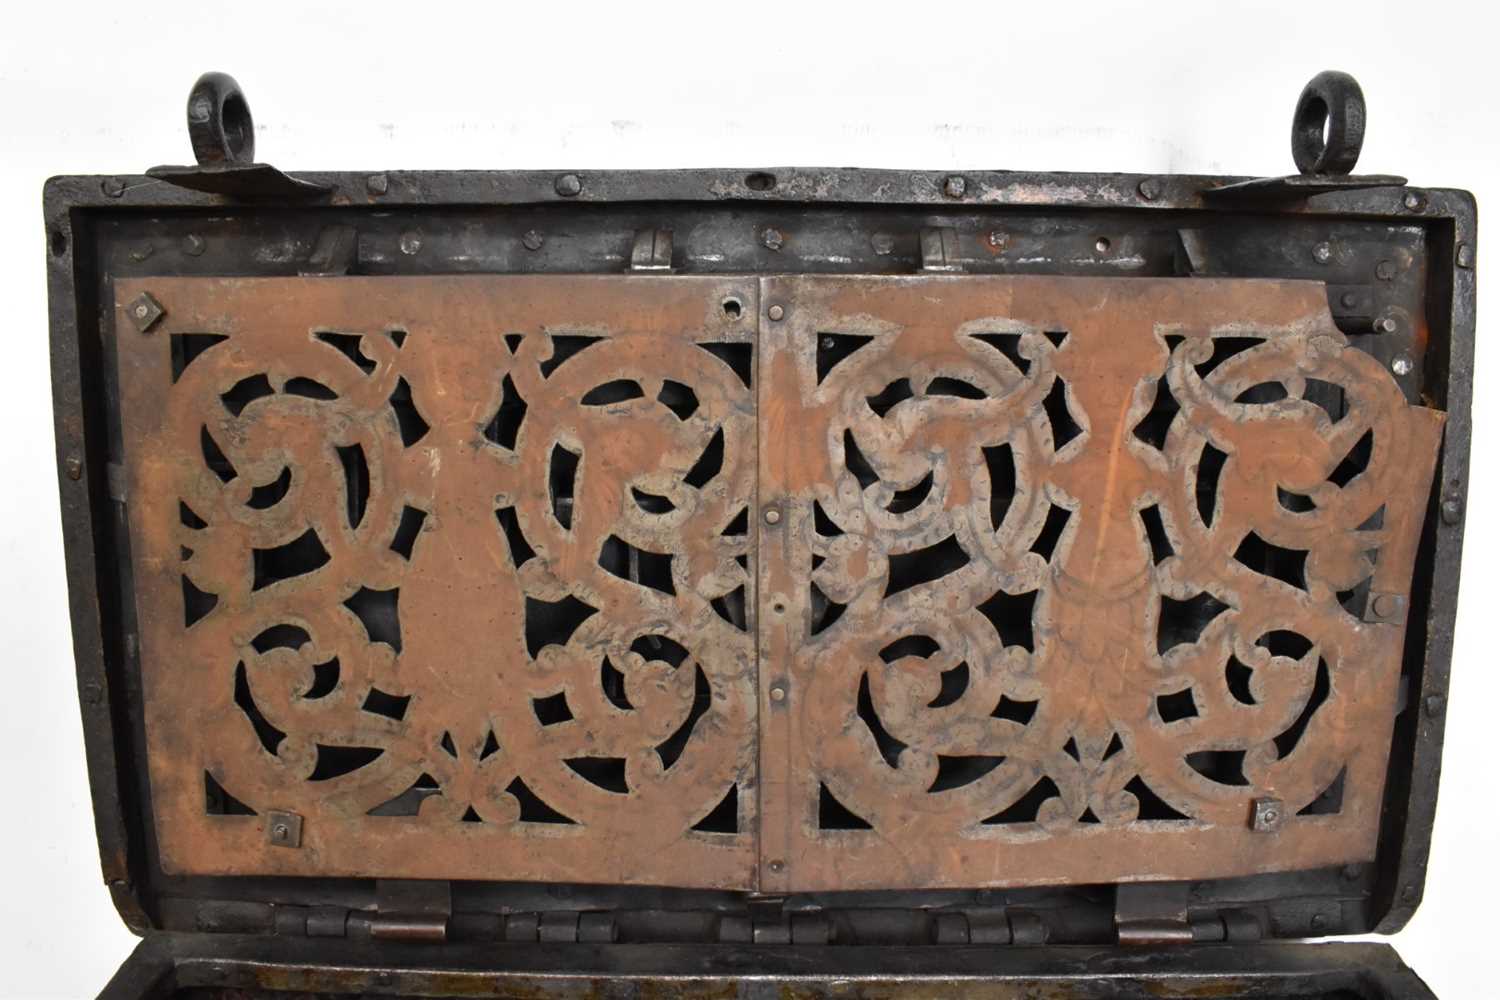 17th century German iron Armada chest with intricate locking system, key marked S. Morden - Image 3 of 23